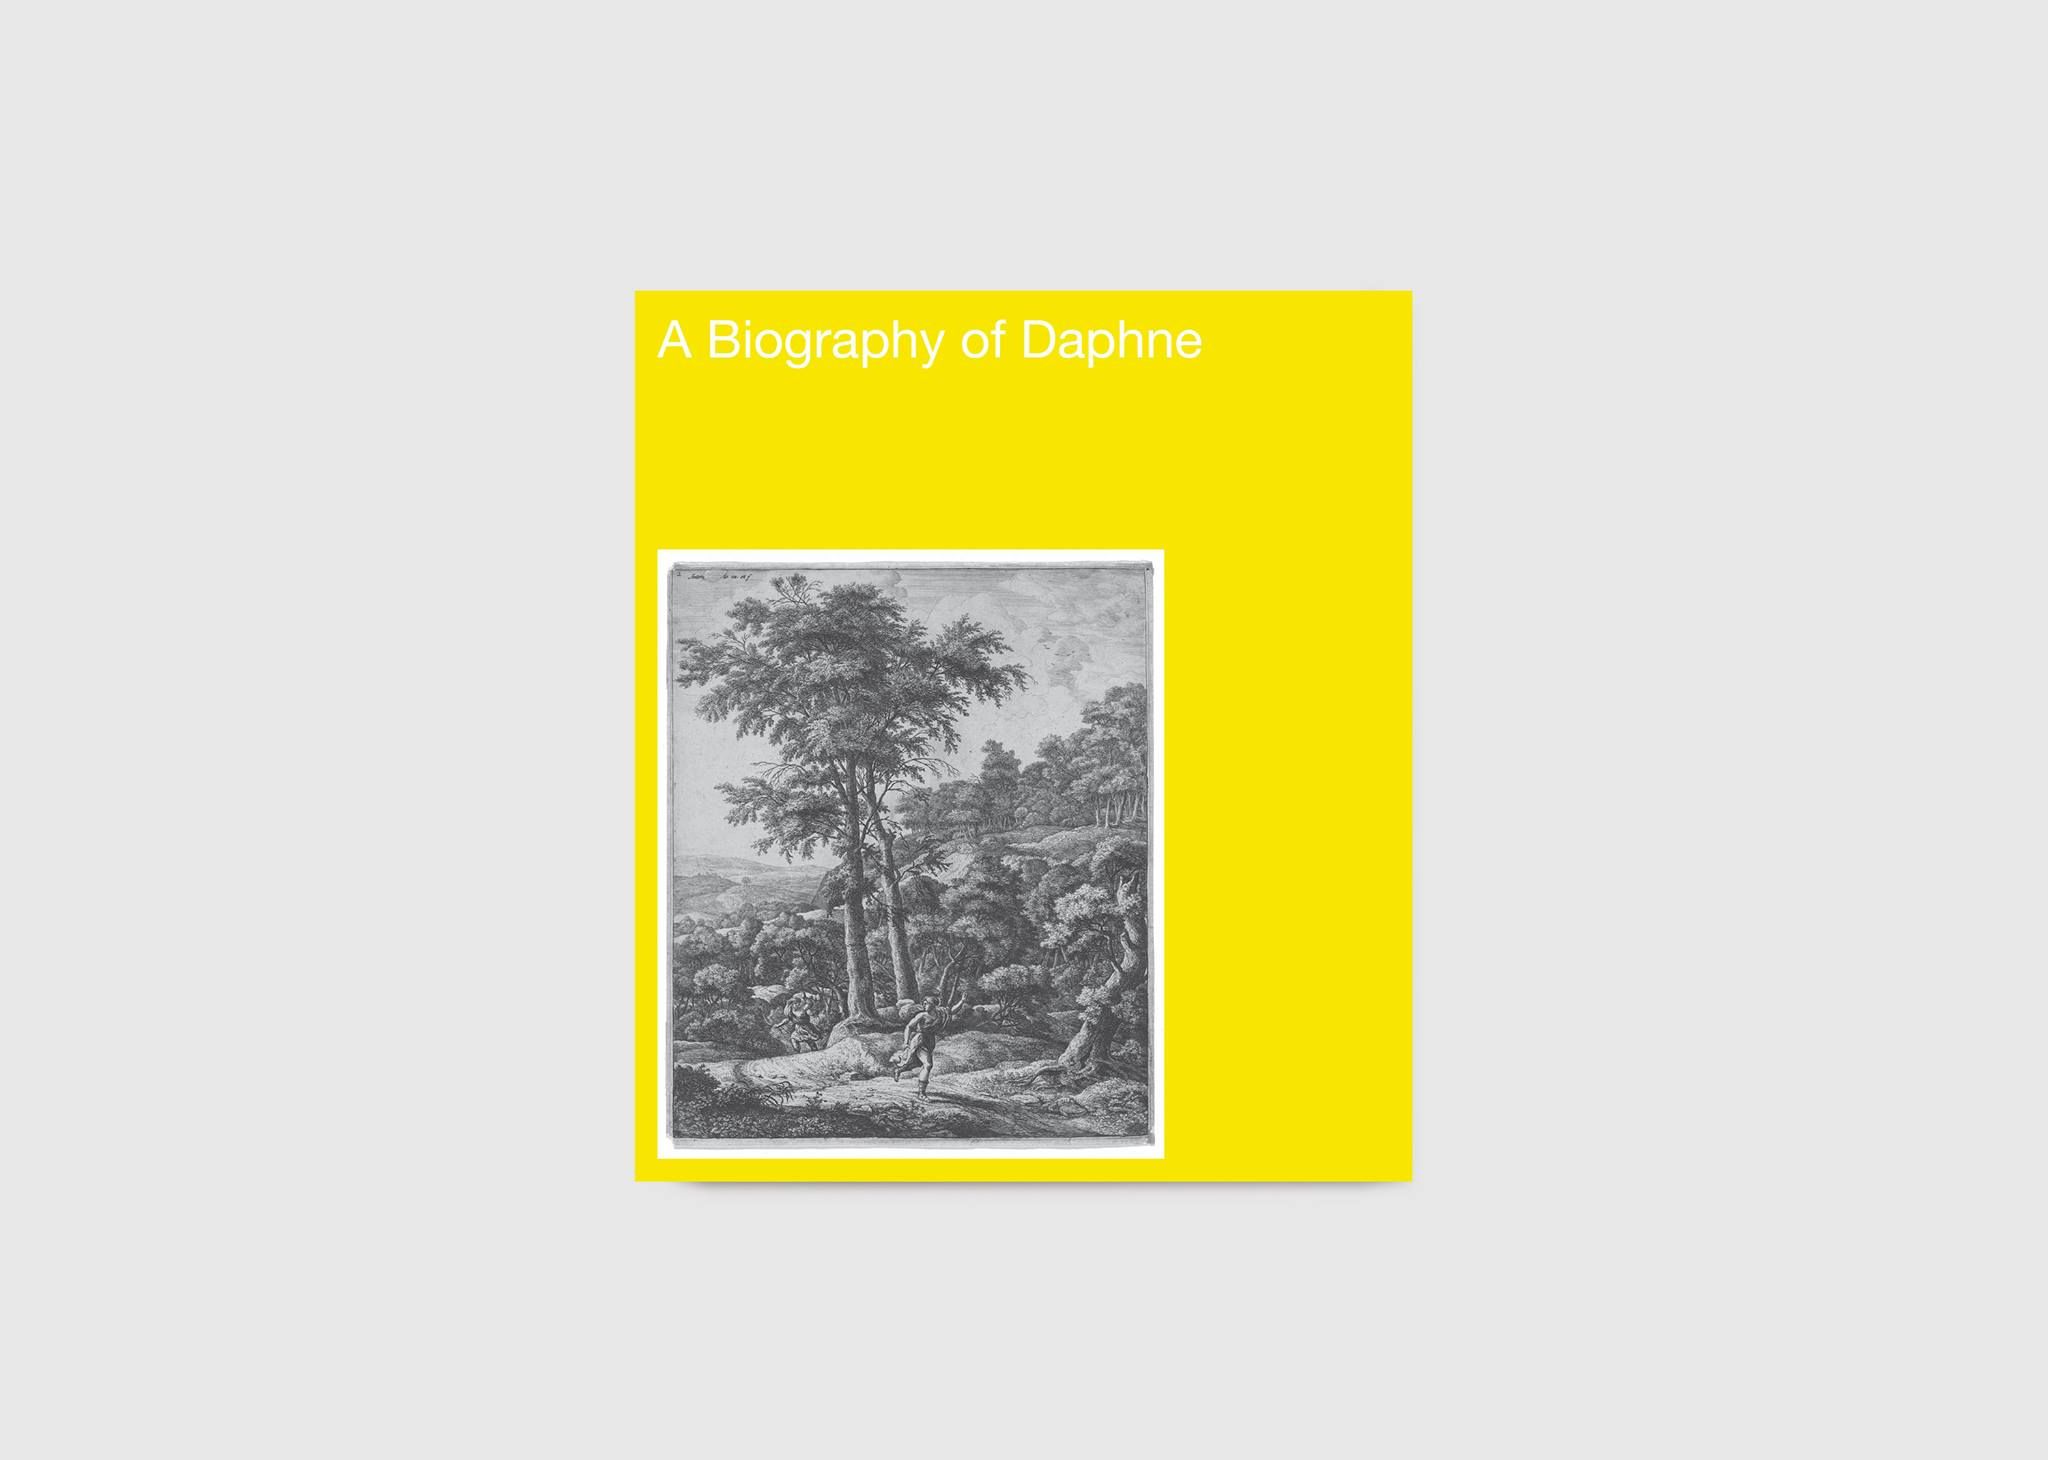 A Biography of Daphne - ACCA Melbourne